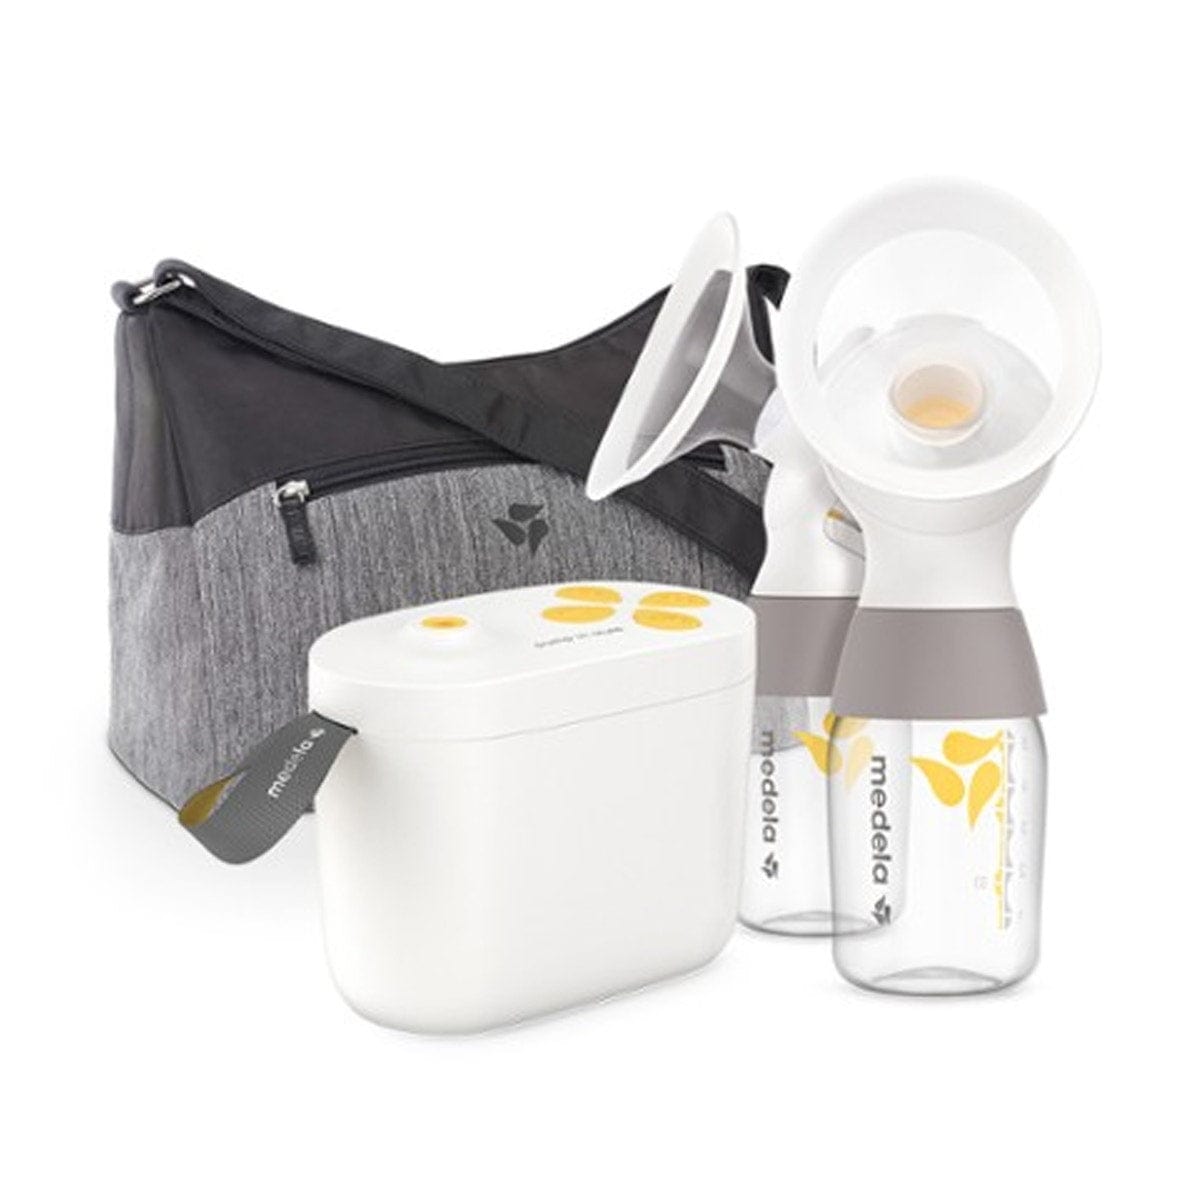 Medela Pump in Style Max Flow Technology – Jump! The BABY Store